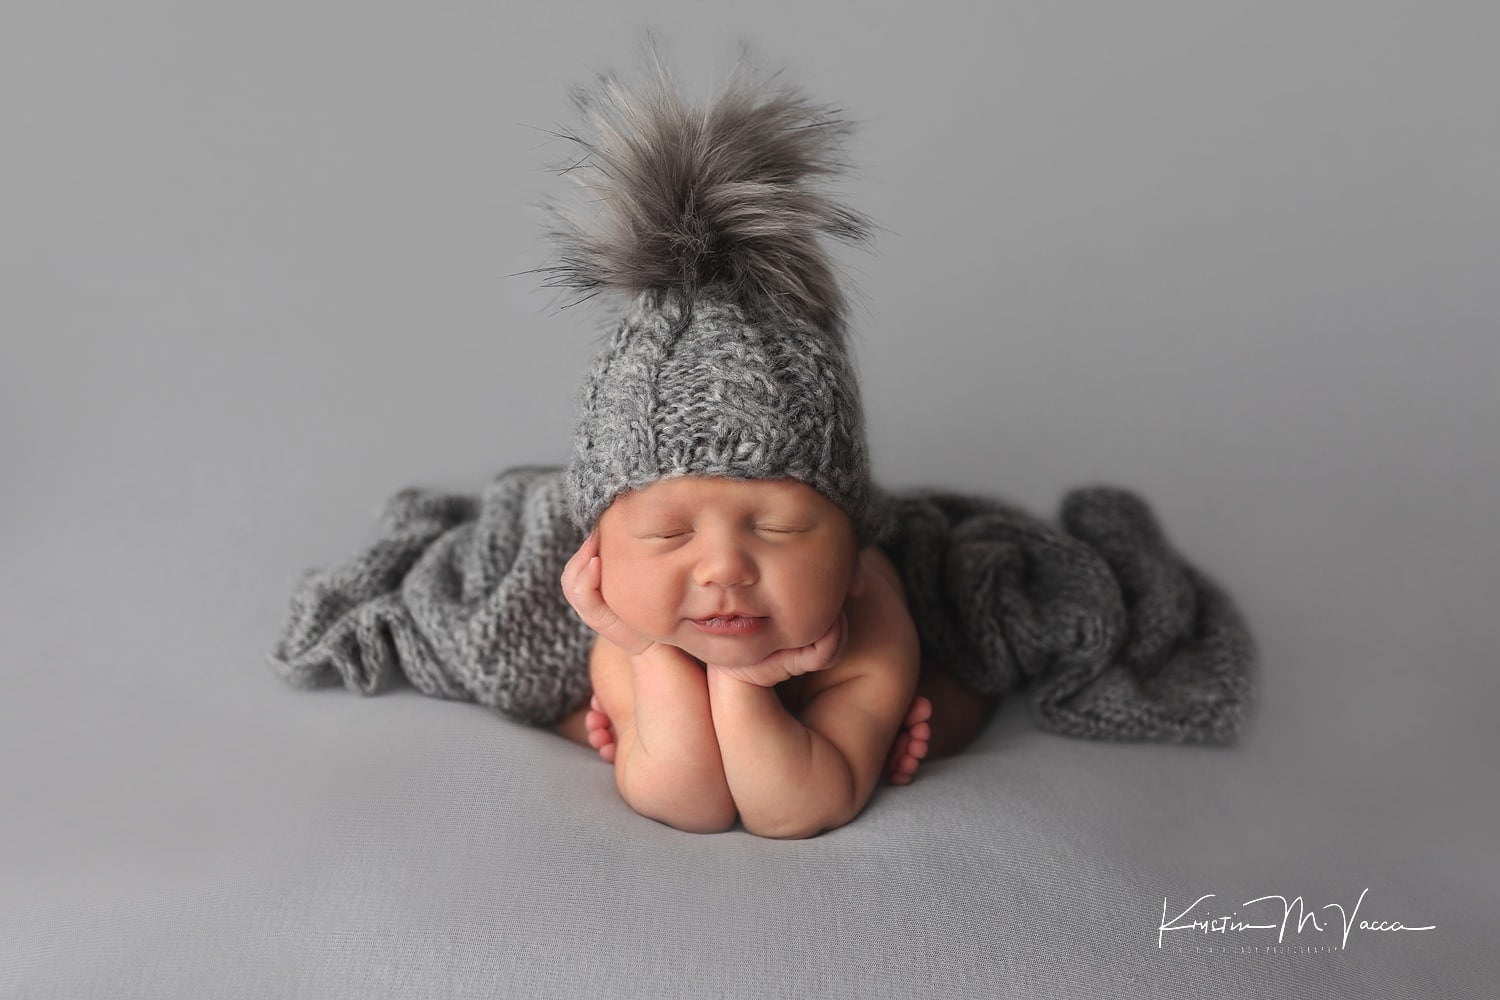 professional baby photography near me